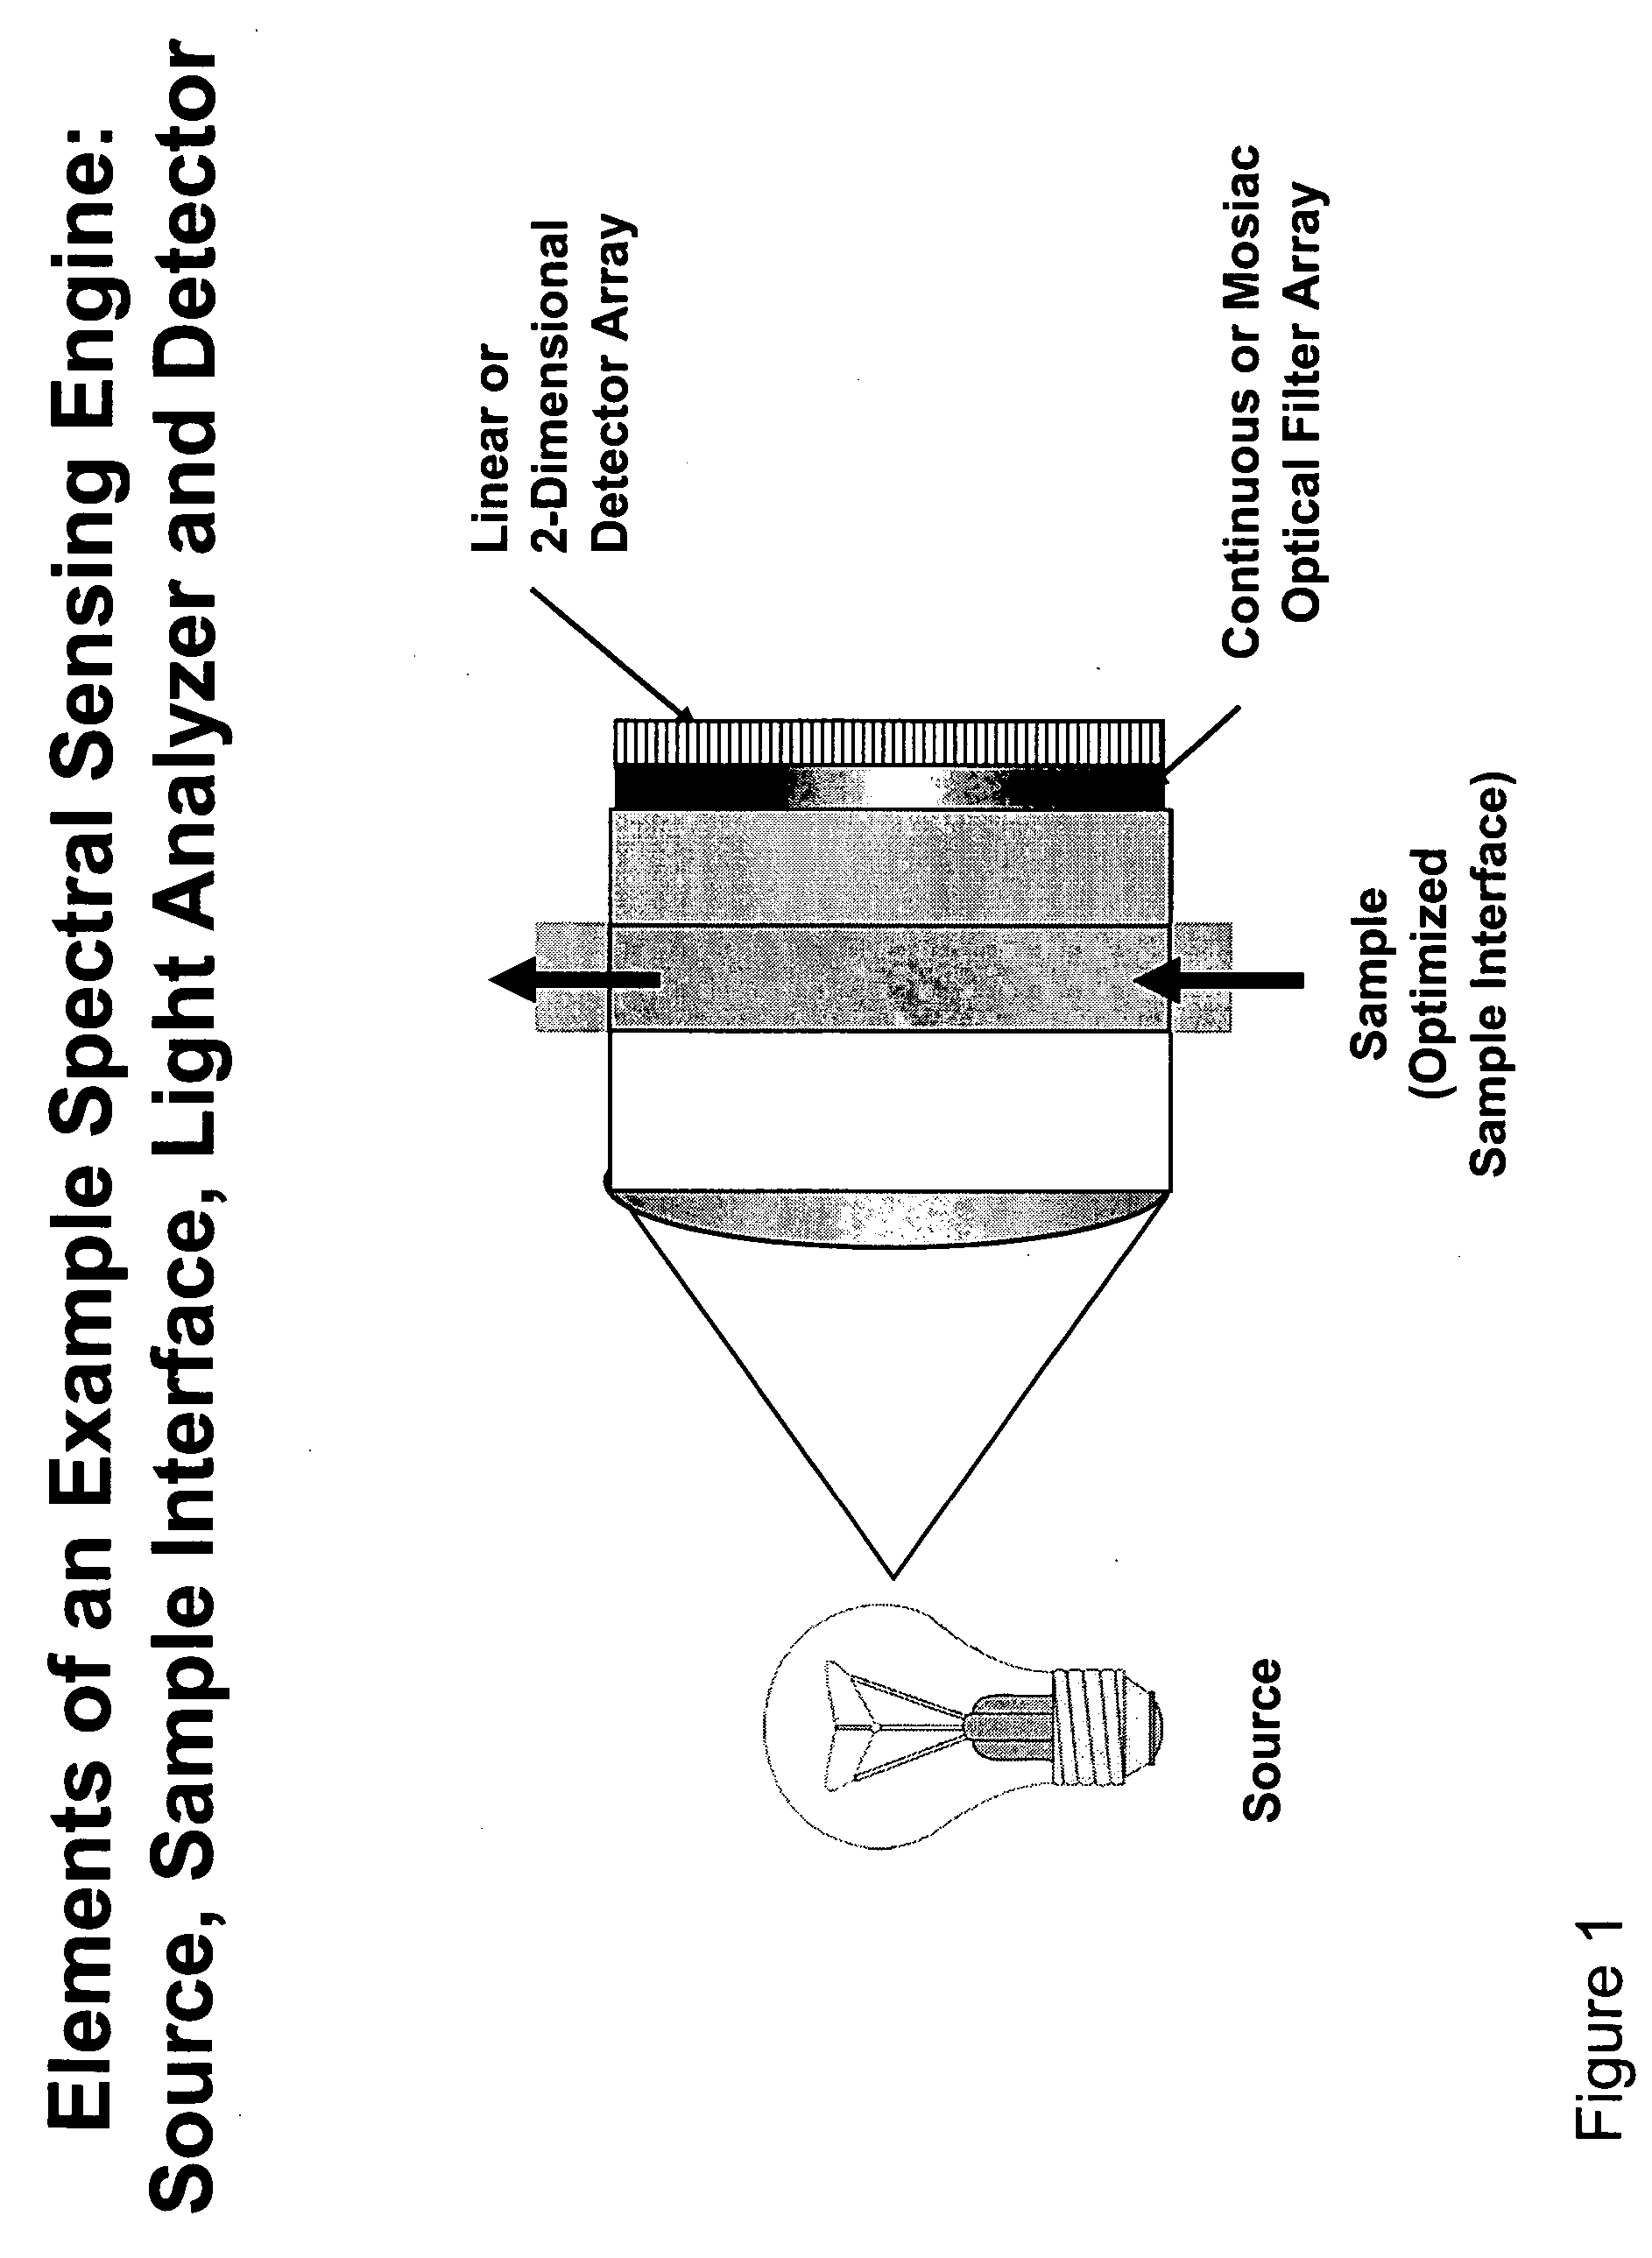 System and method for integrated sensing and control of industrial processes